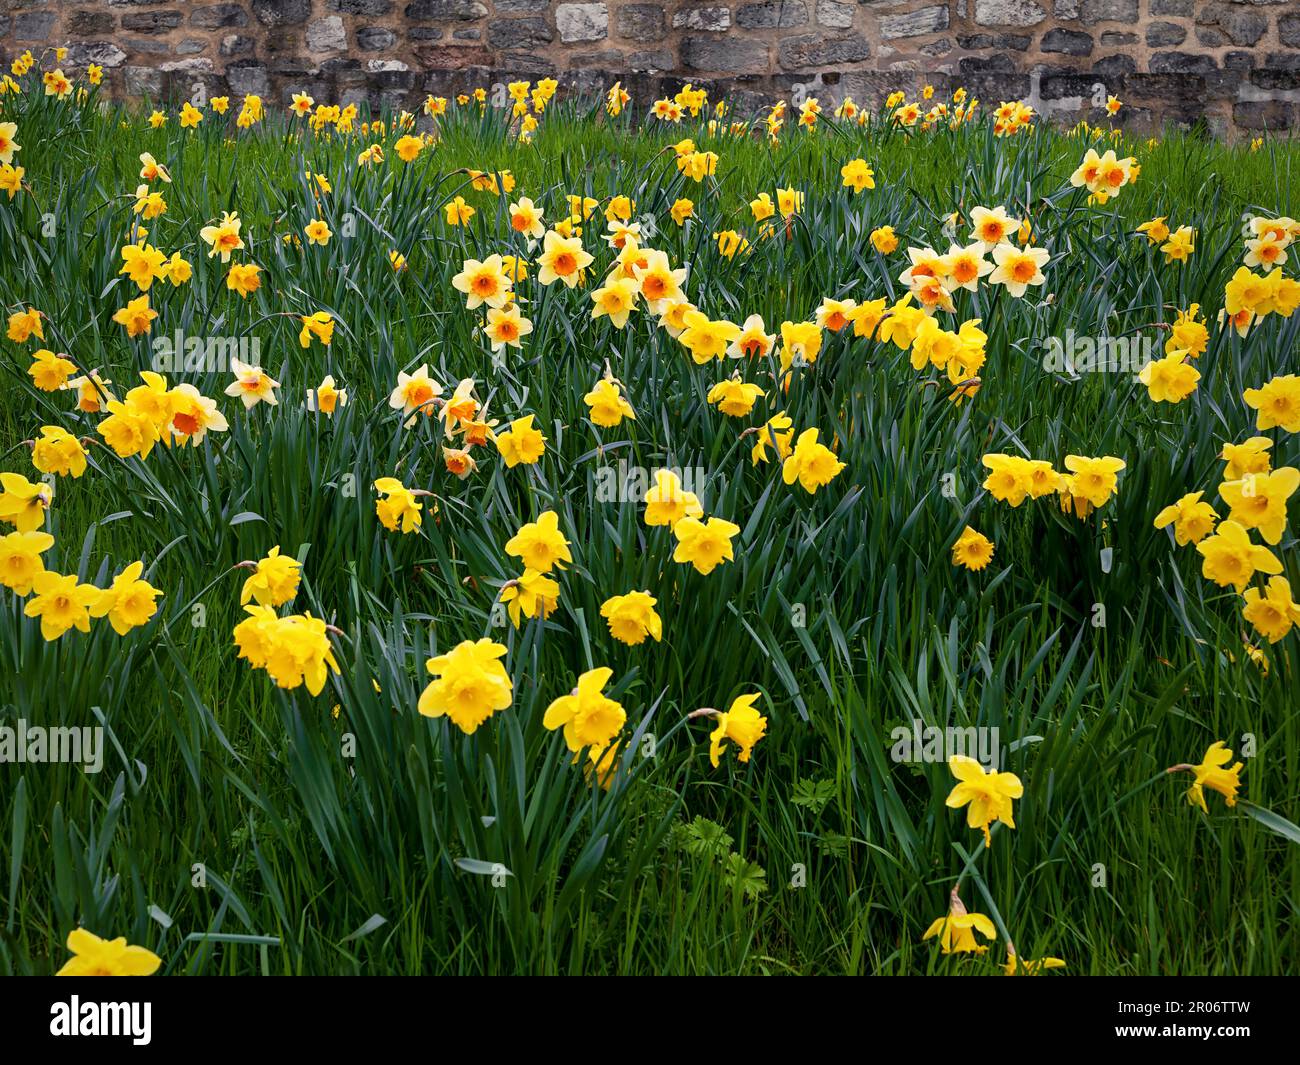 Yellow daffodils in front of a city wall Stock Photo